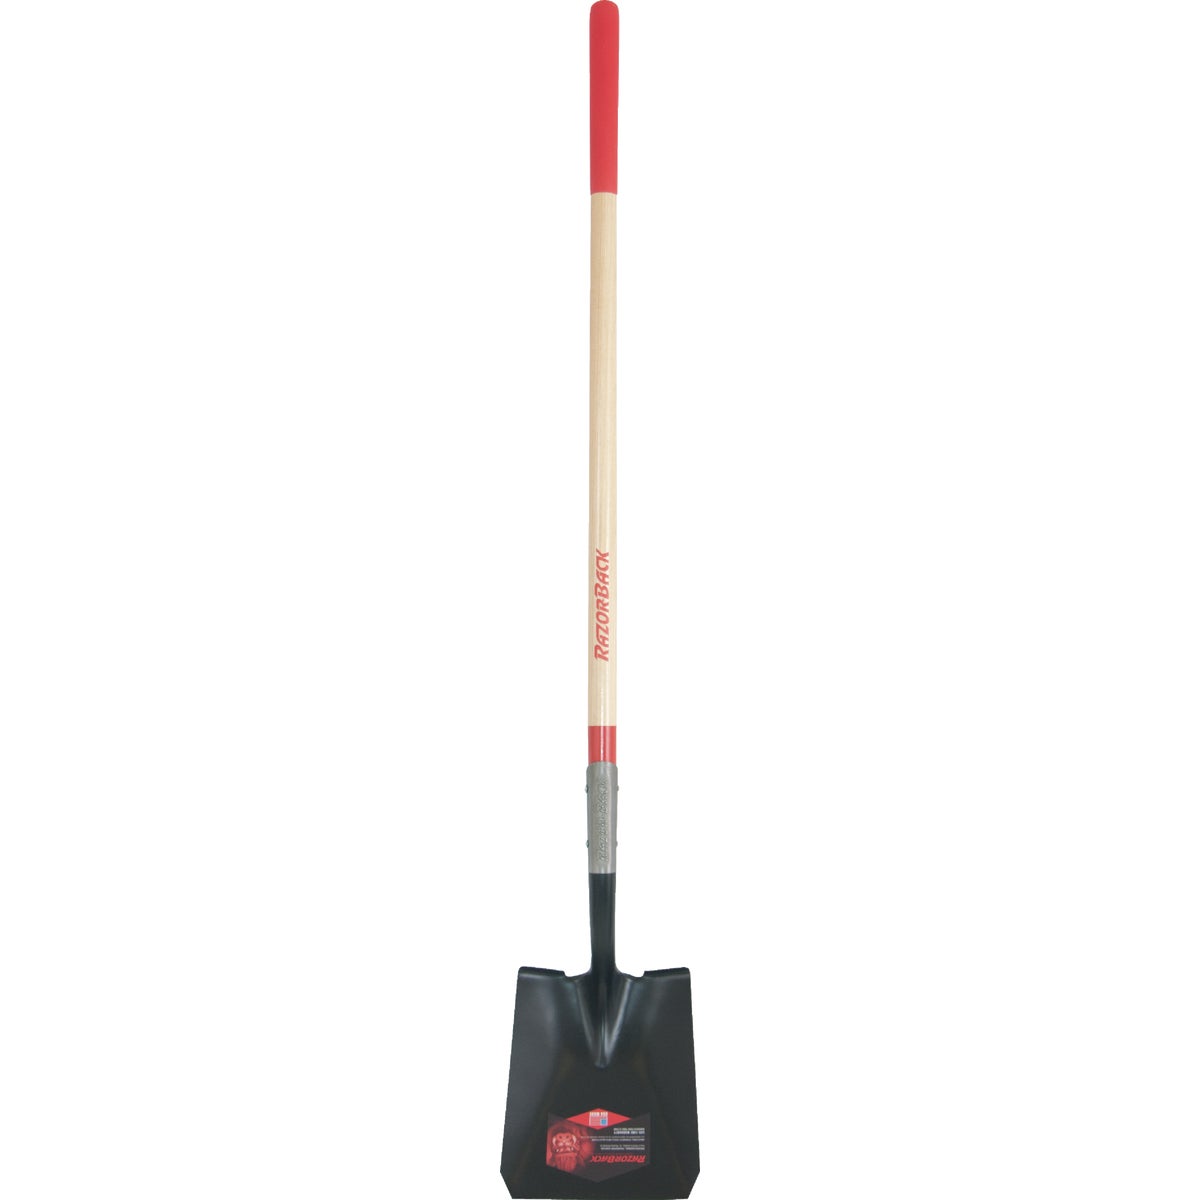 Item 744500, Ideal for lifting and moving heavy loads of rock, soil, and other materials